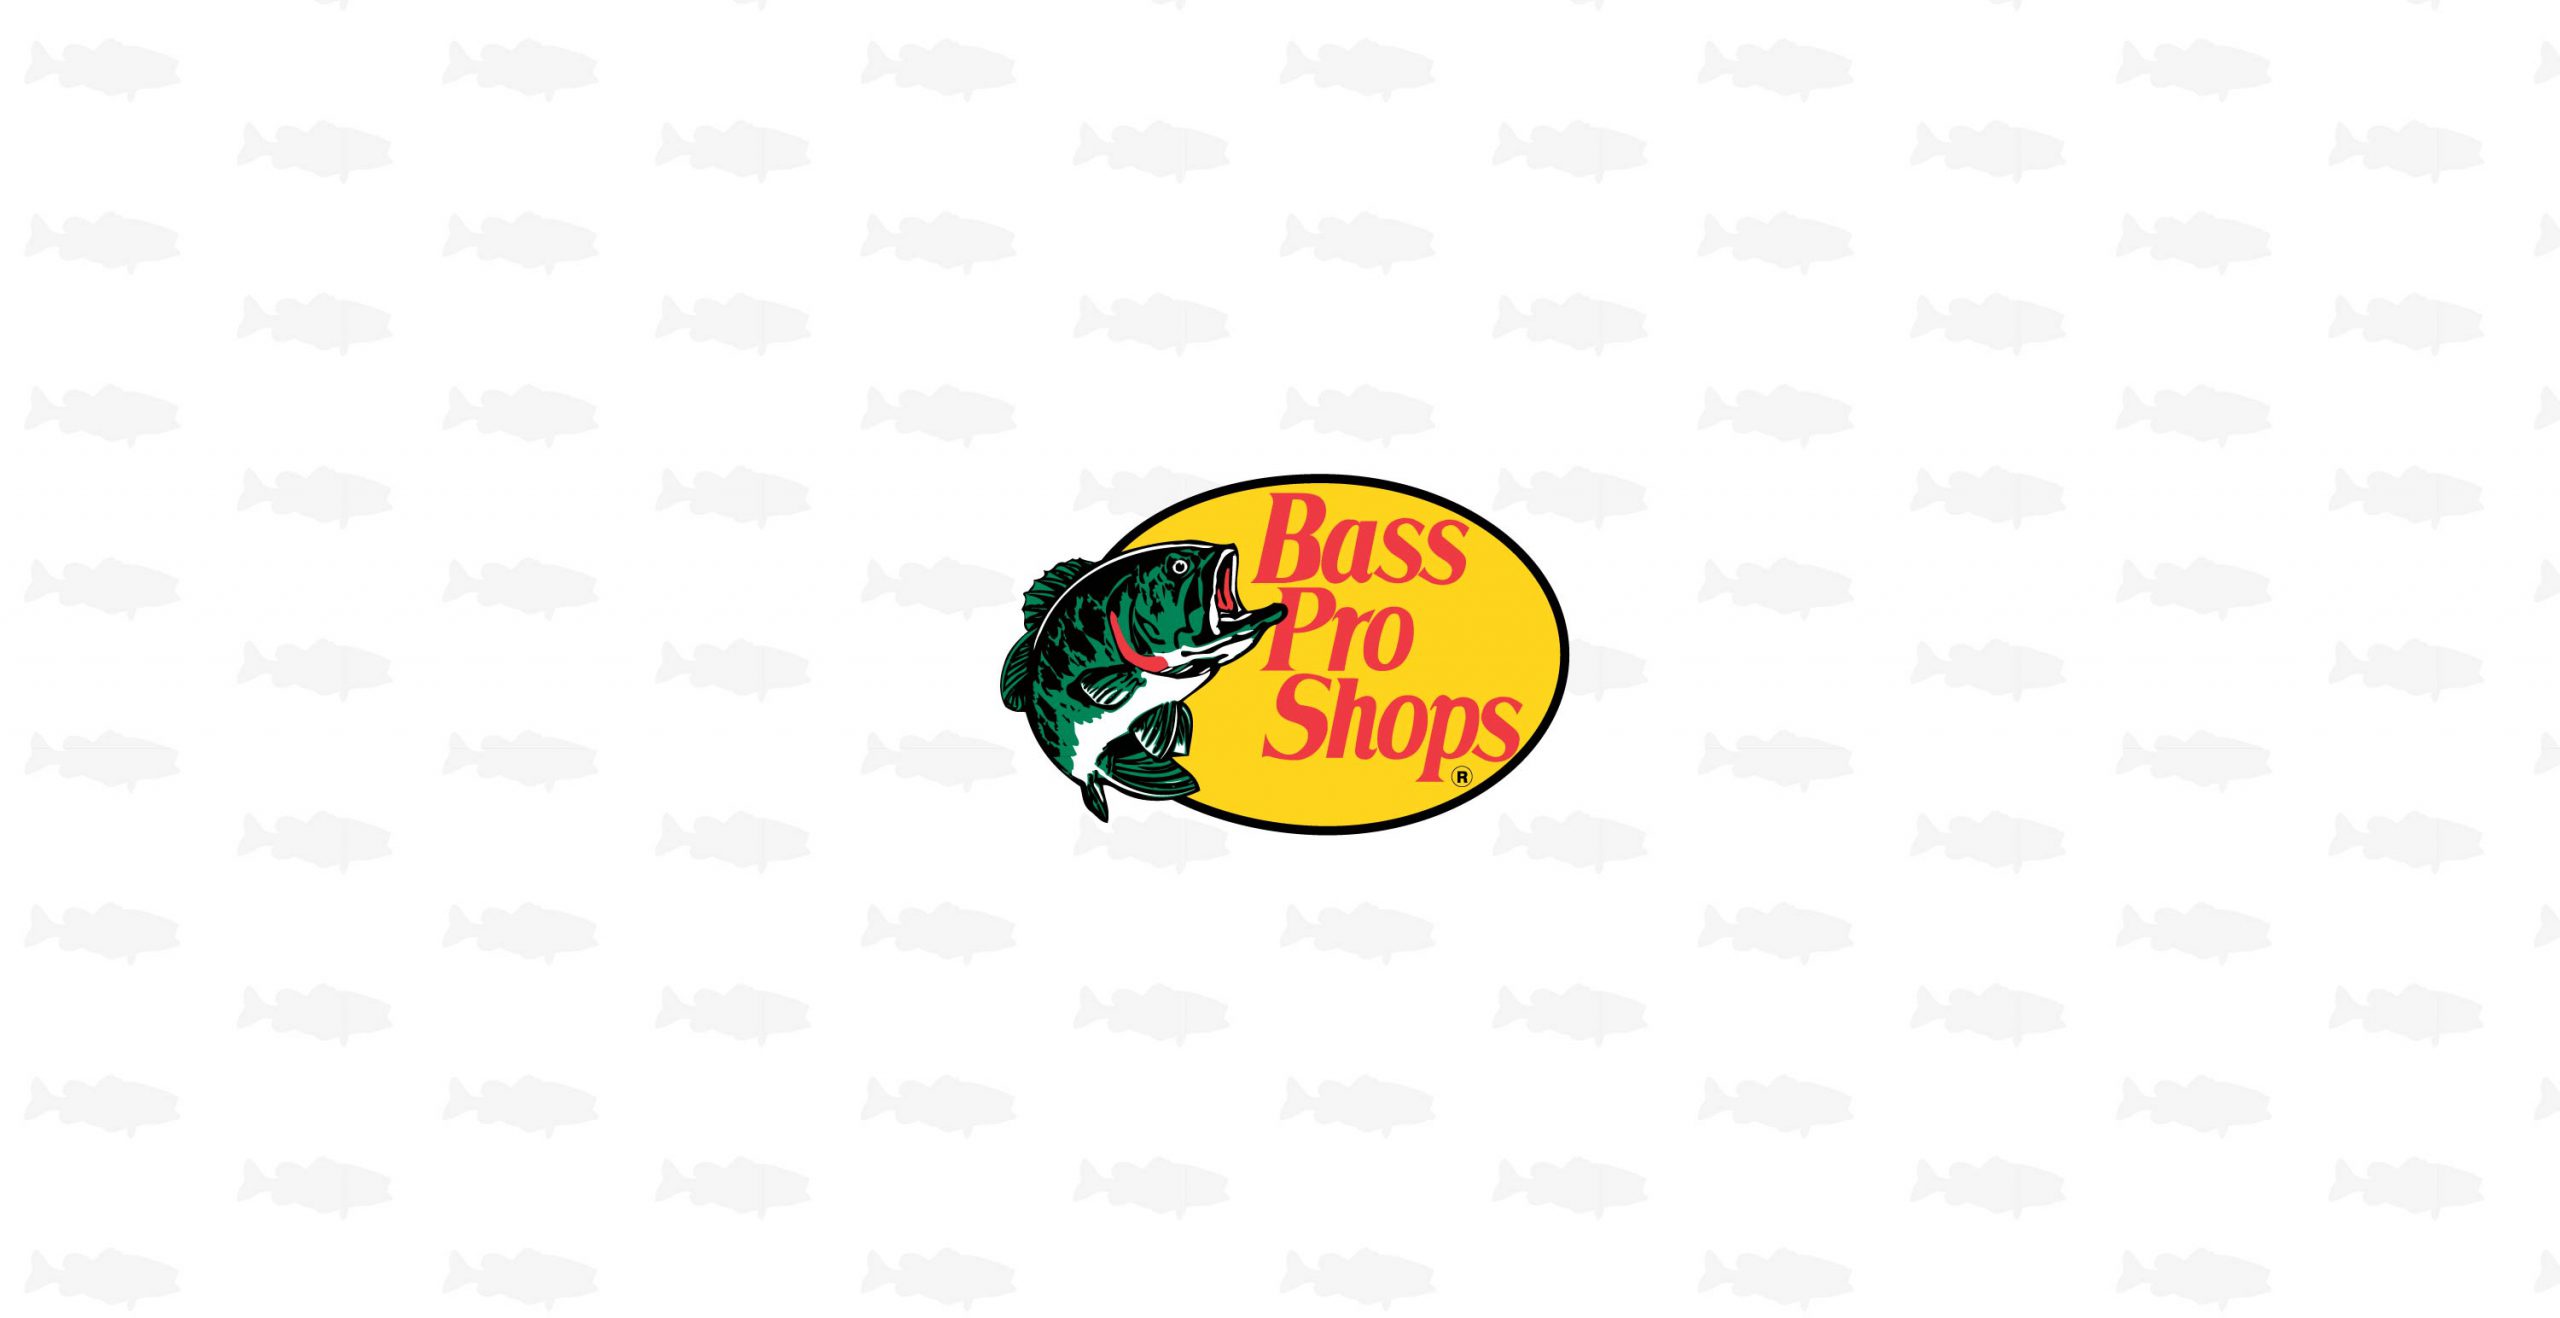 Bass Pro Shops - Logo and background